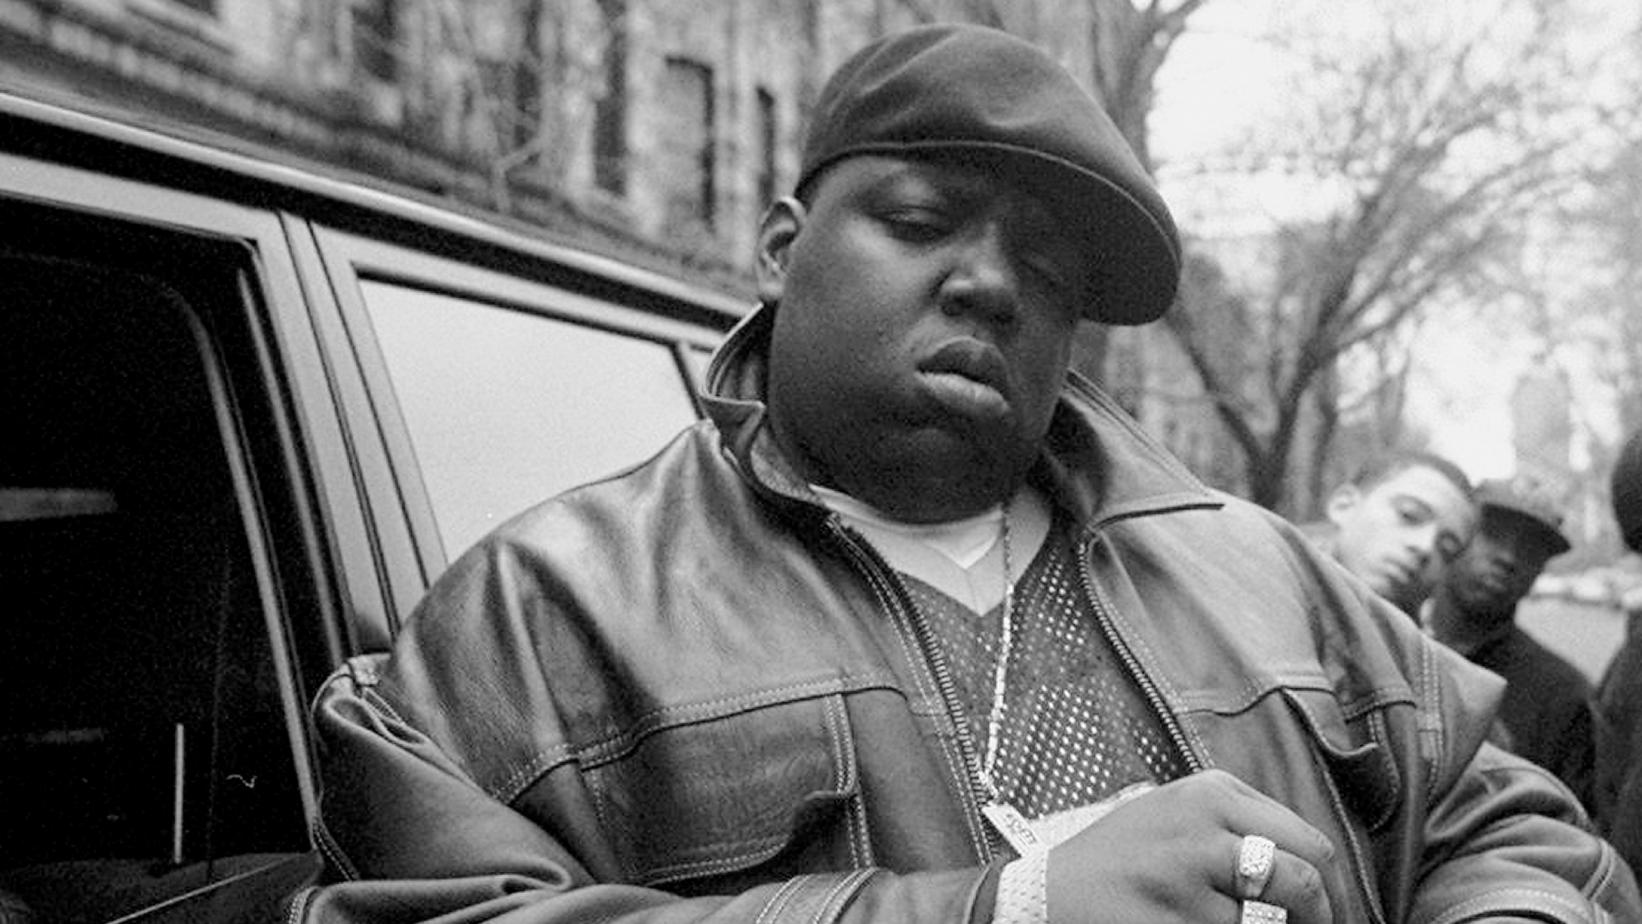 Juicy – The Notorious B.I.G